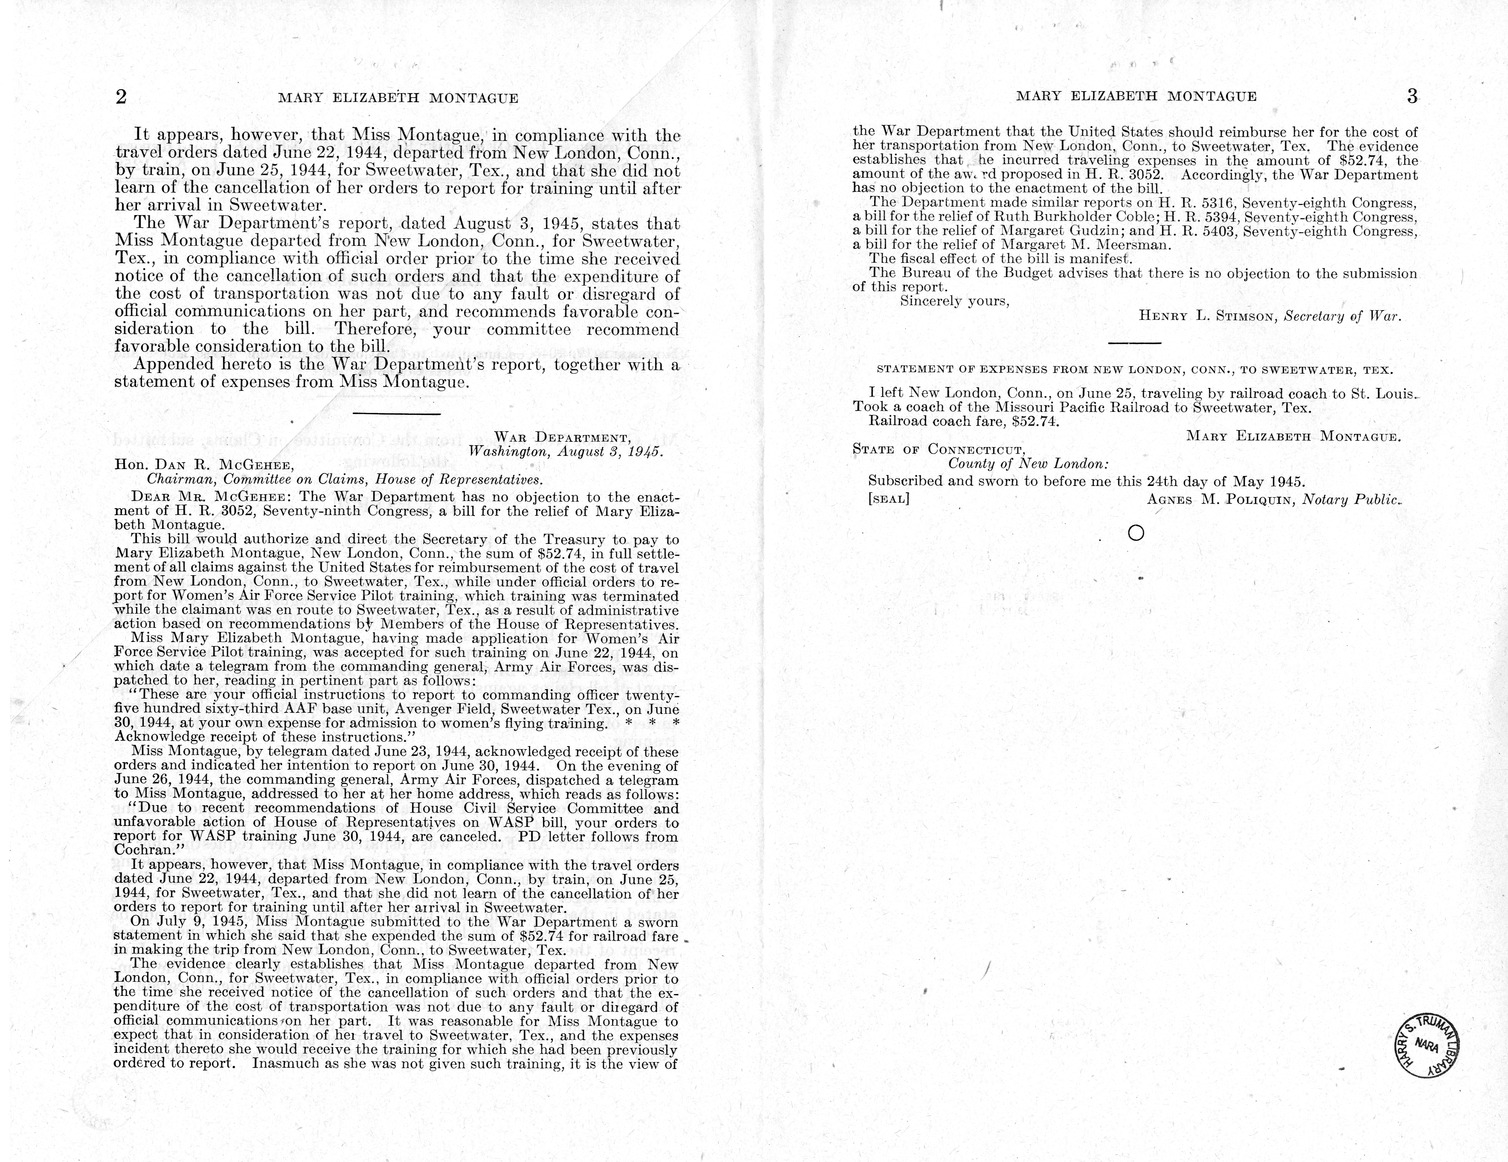 Memorandum from Frederick J. Bailey to M. C. Latta, H.R. 3052, For the Relief of Mary Elizabeth Montague, with Attachments